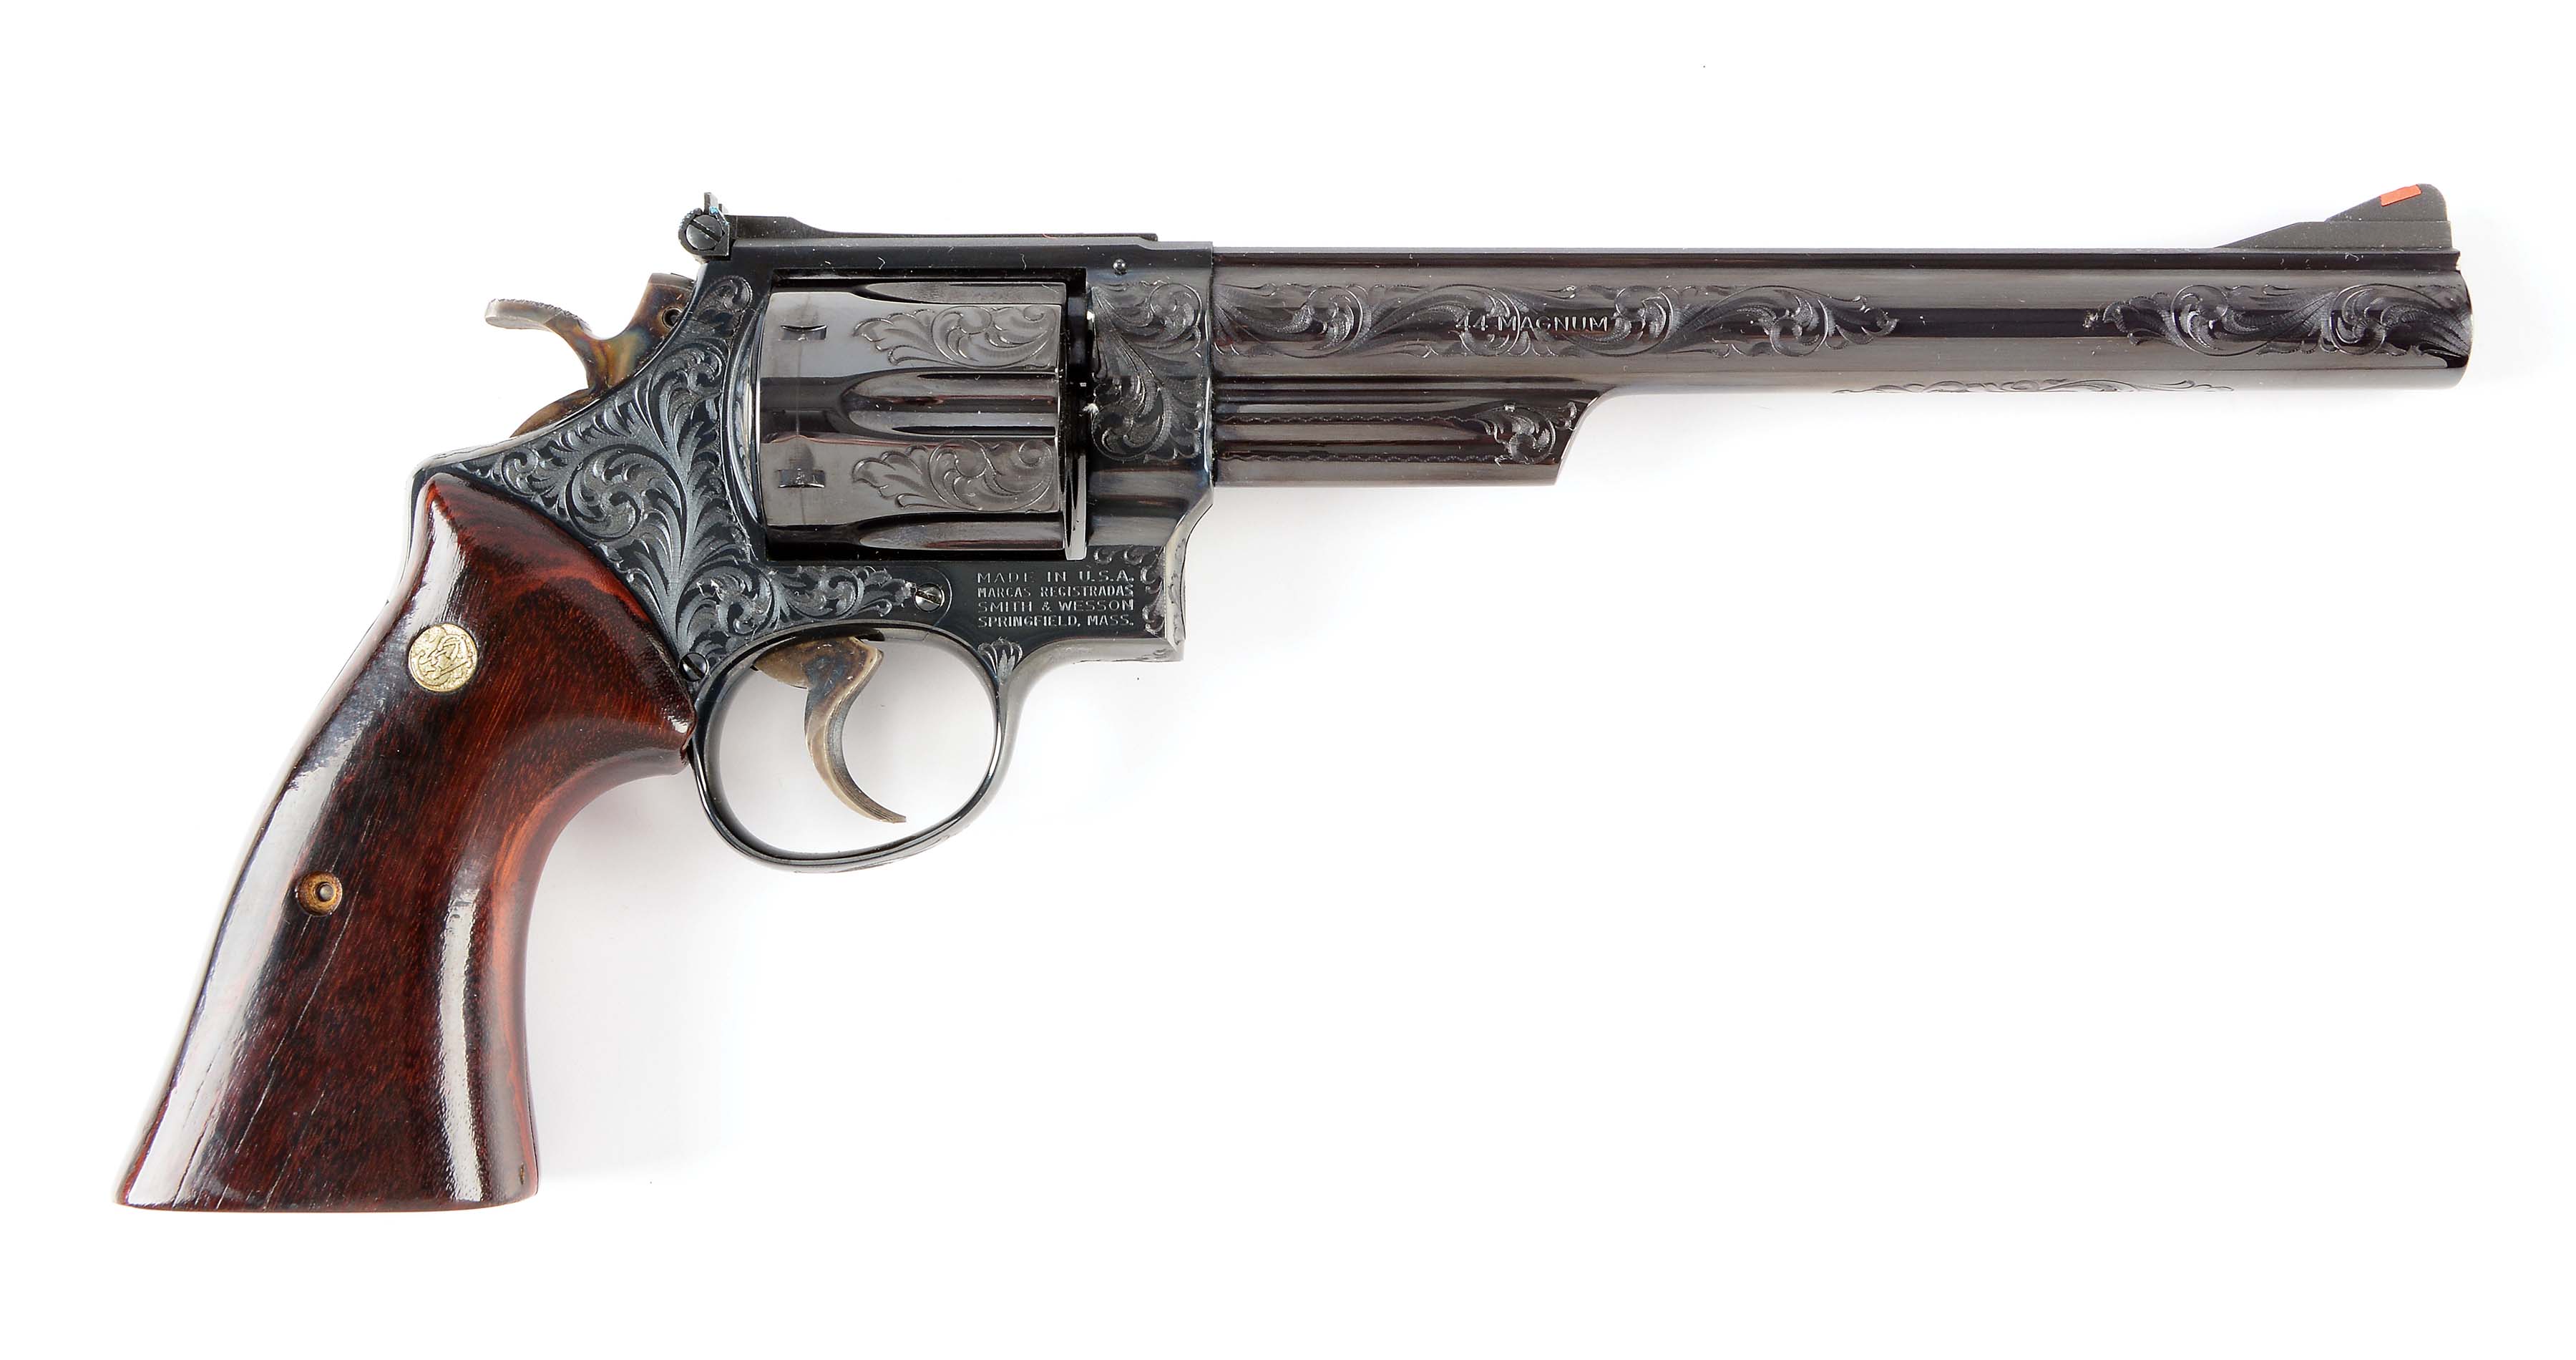 C) cased factory engraved smith & wesson model 29-2 revolver. 